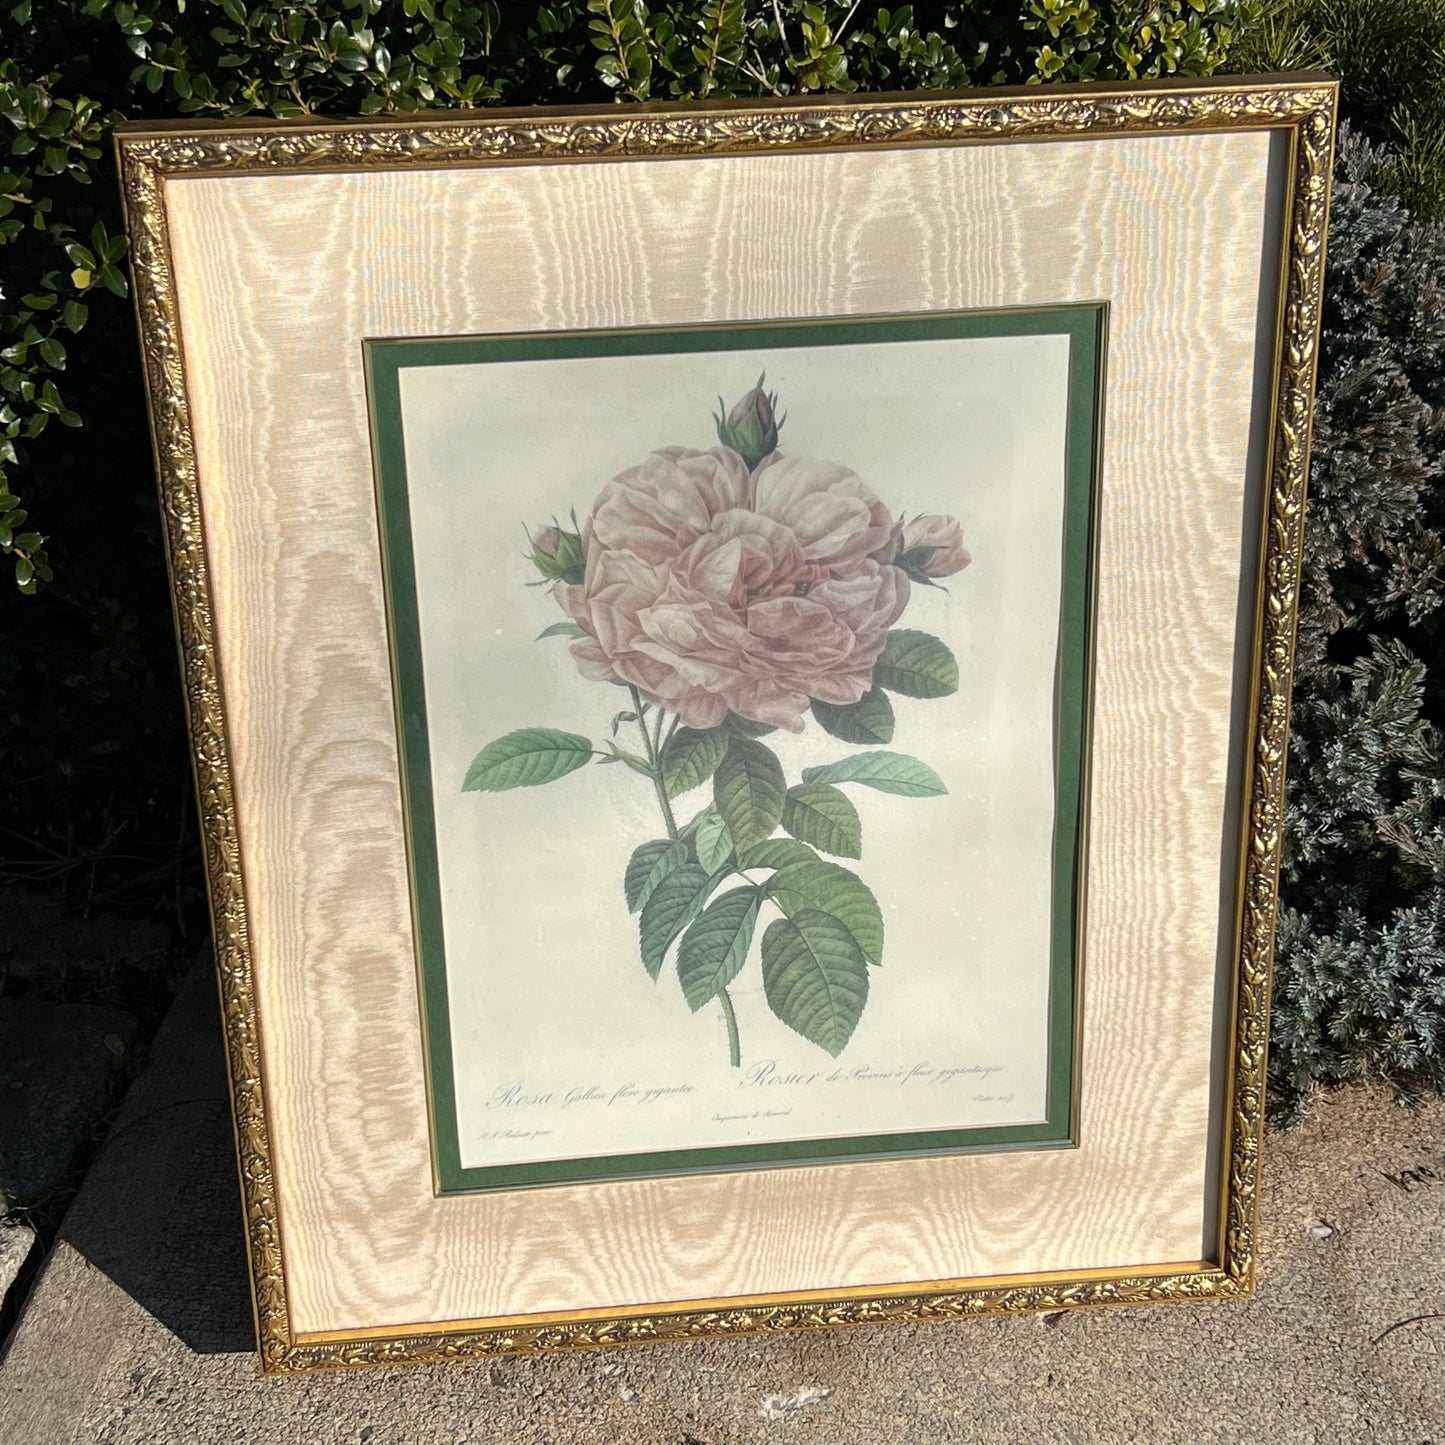 Vintage 1987 Bombay Company Private Collection Redoute "The Rose" Framed Lithograph